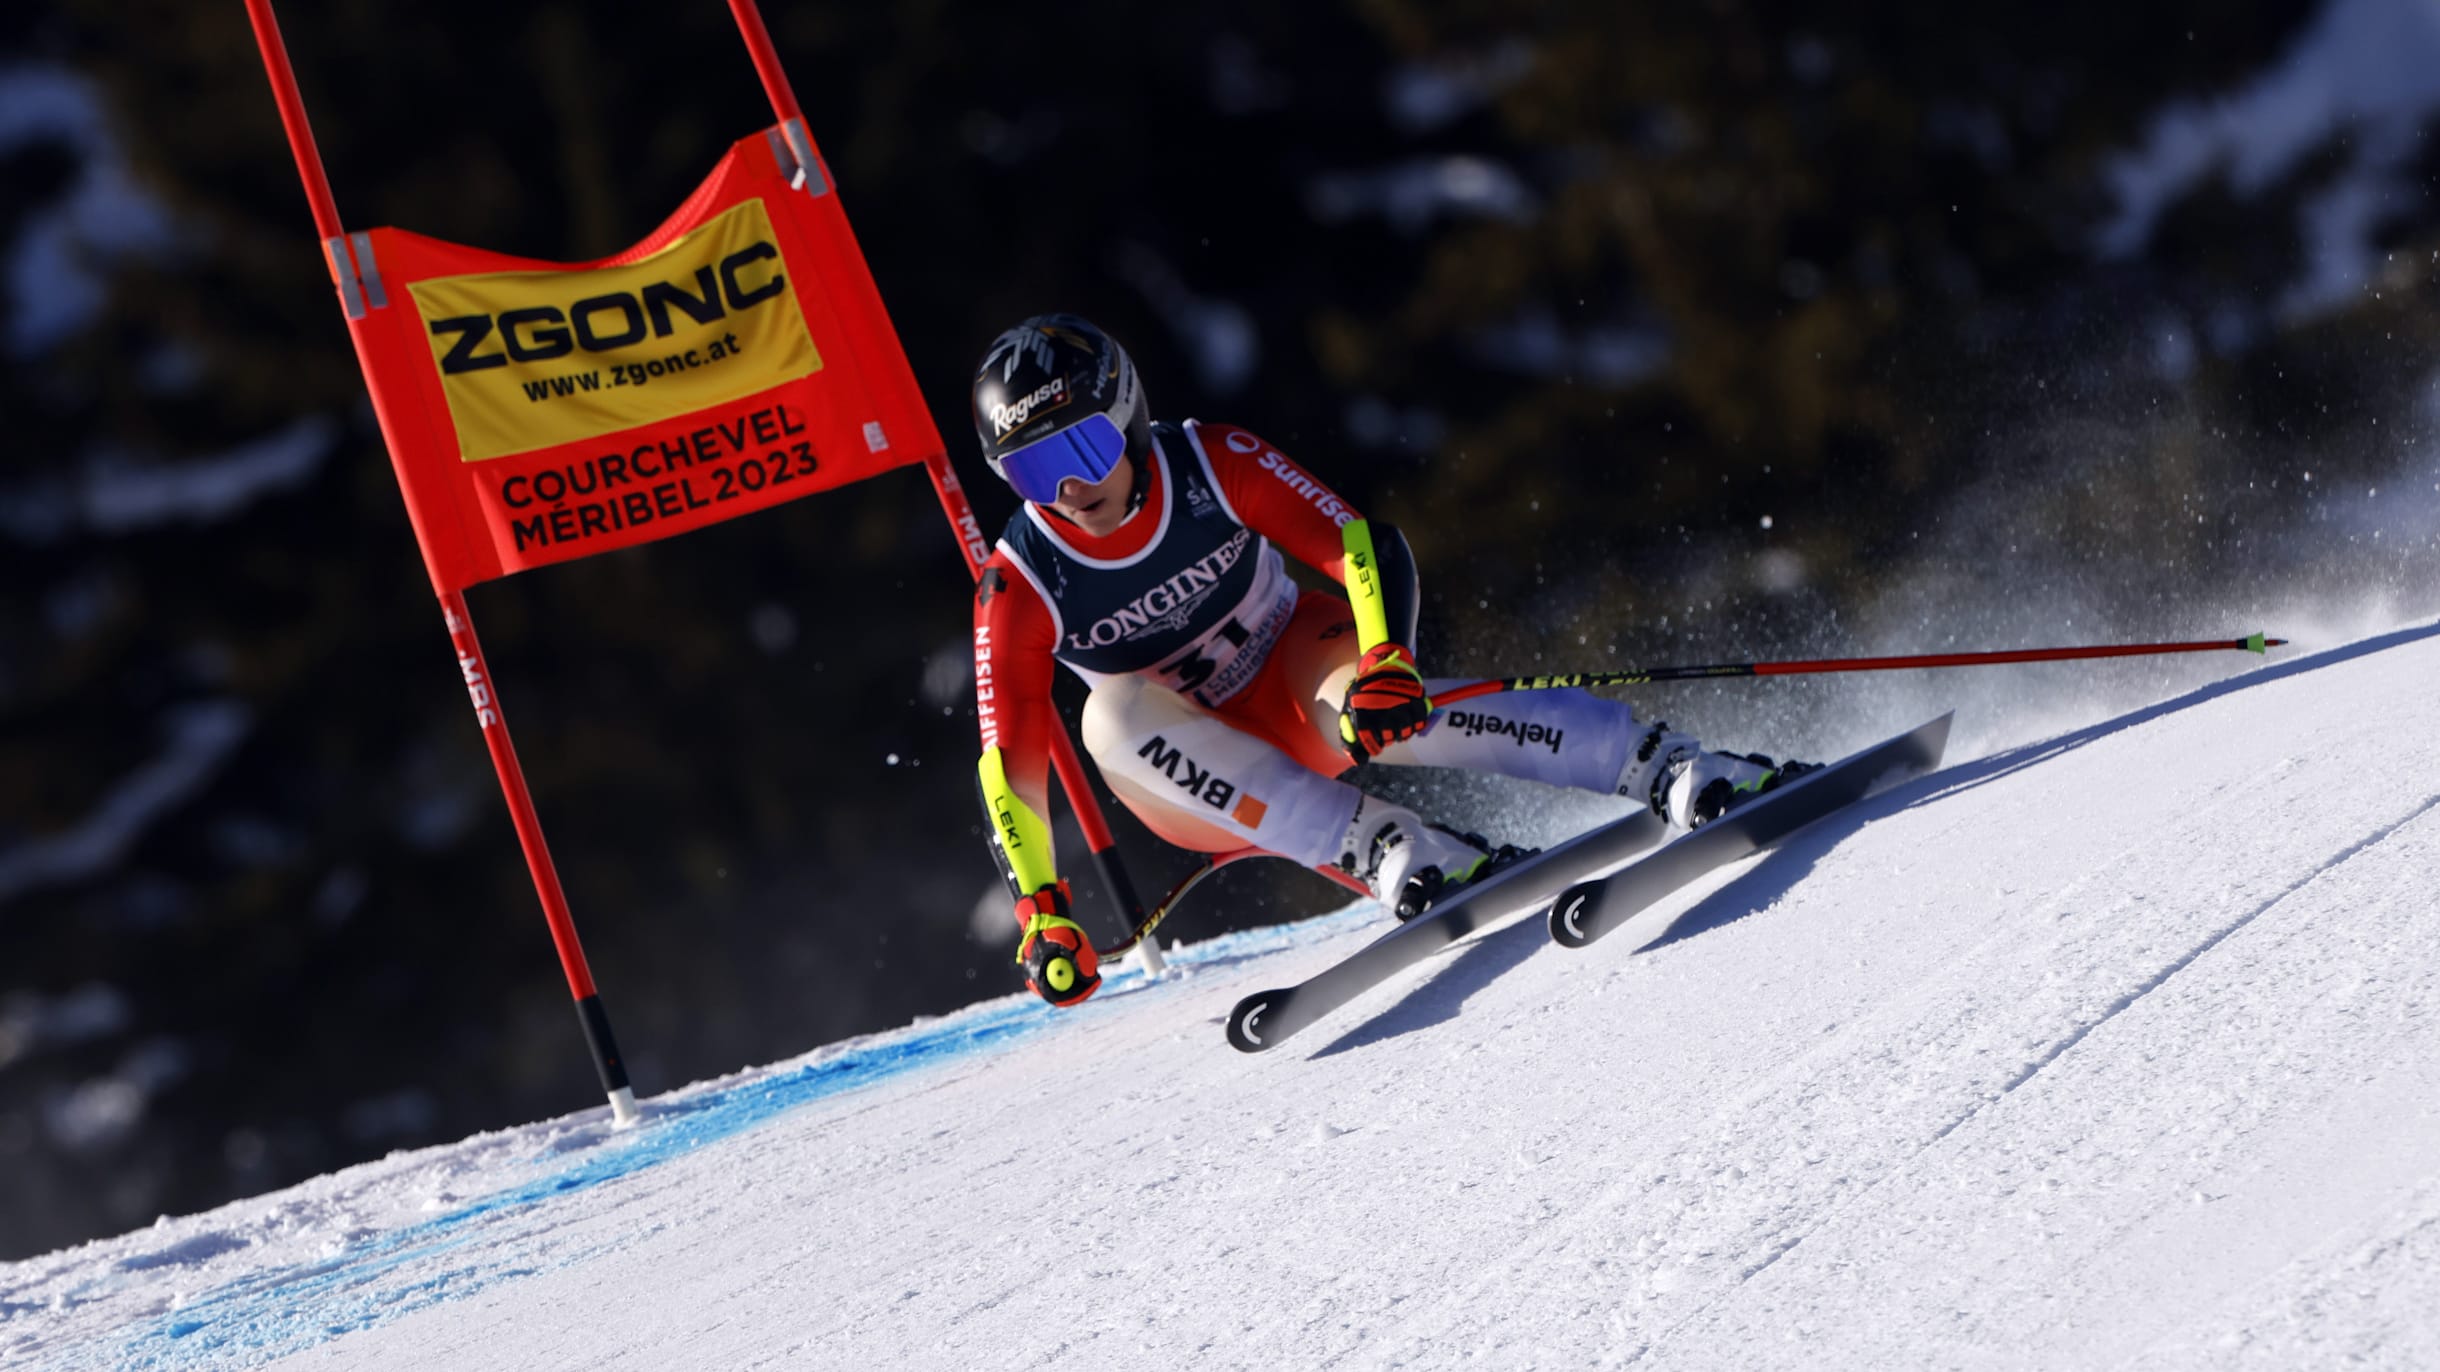 Live streaming, womens combined at 2023 FIS Alpine Ski World Championships on 8 February Preview, schedule and how to watch